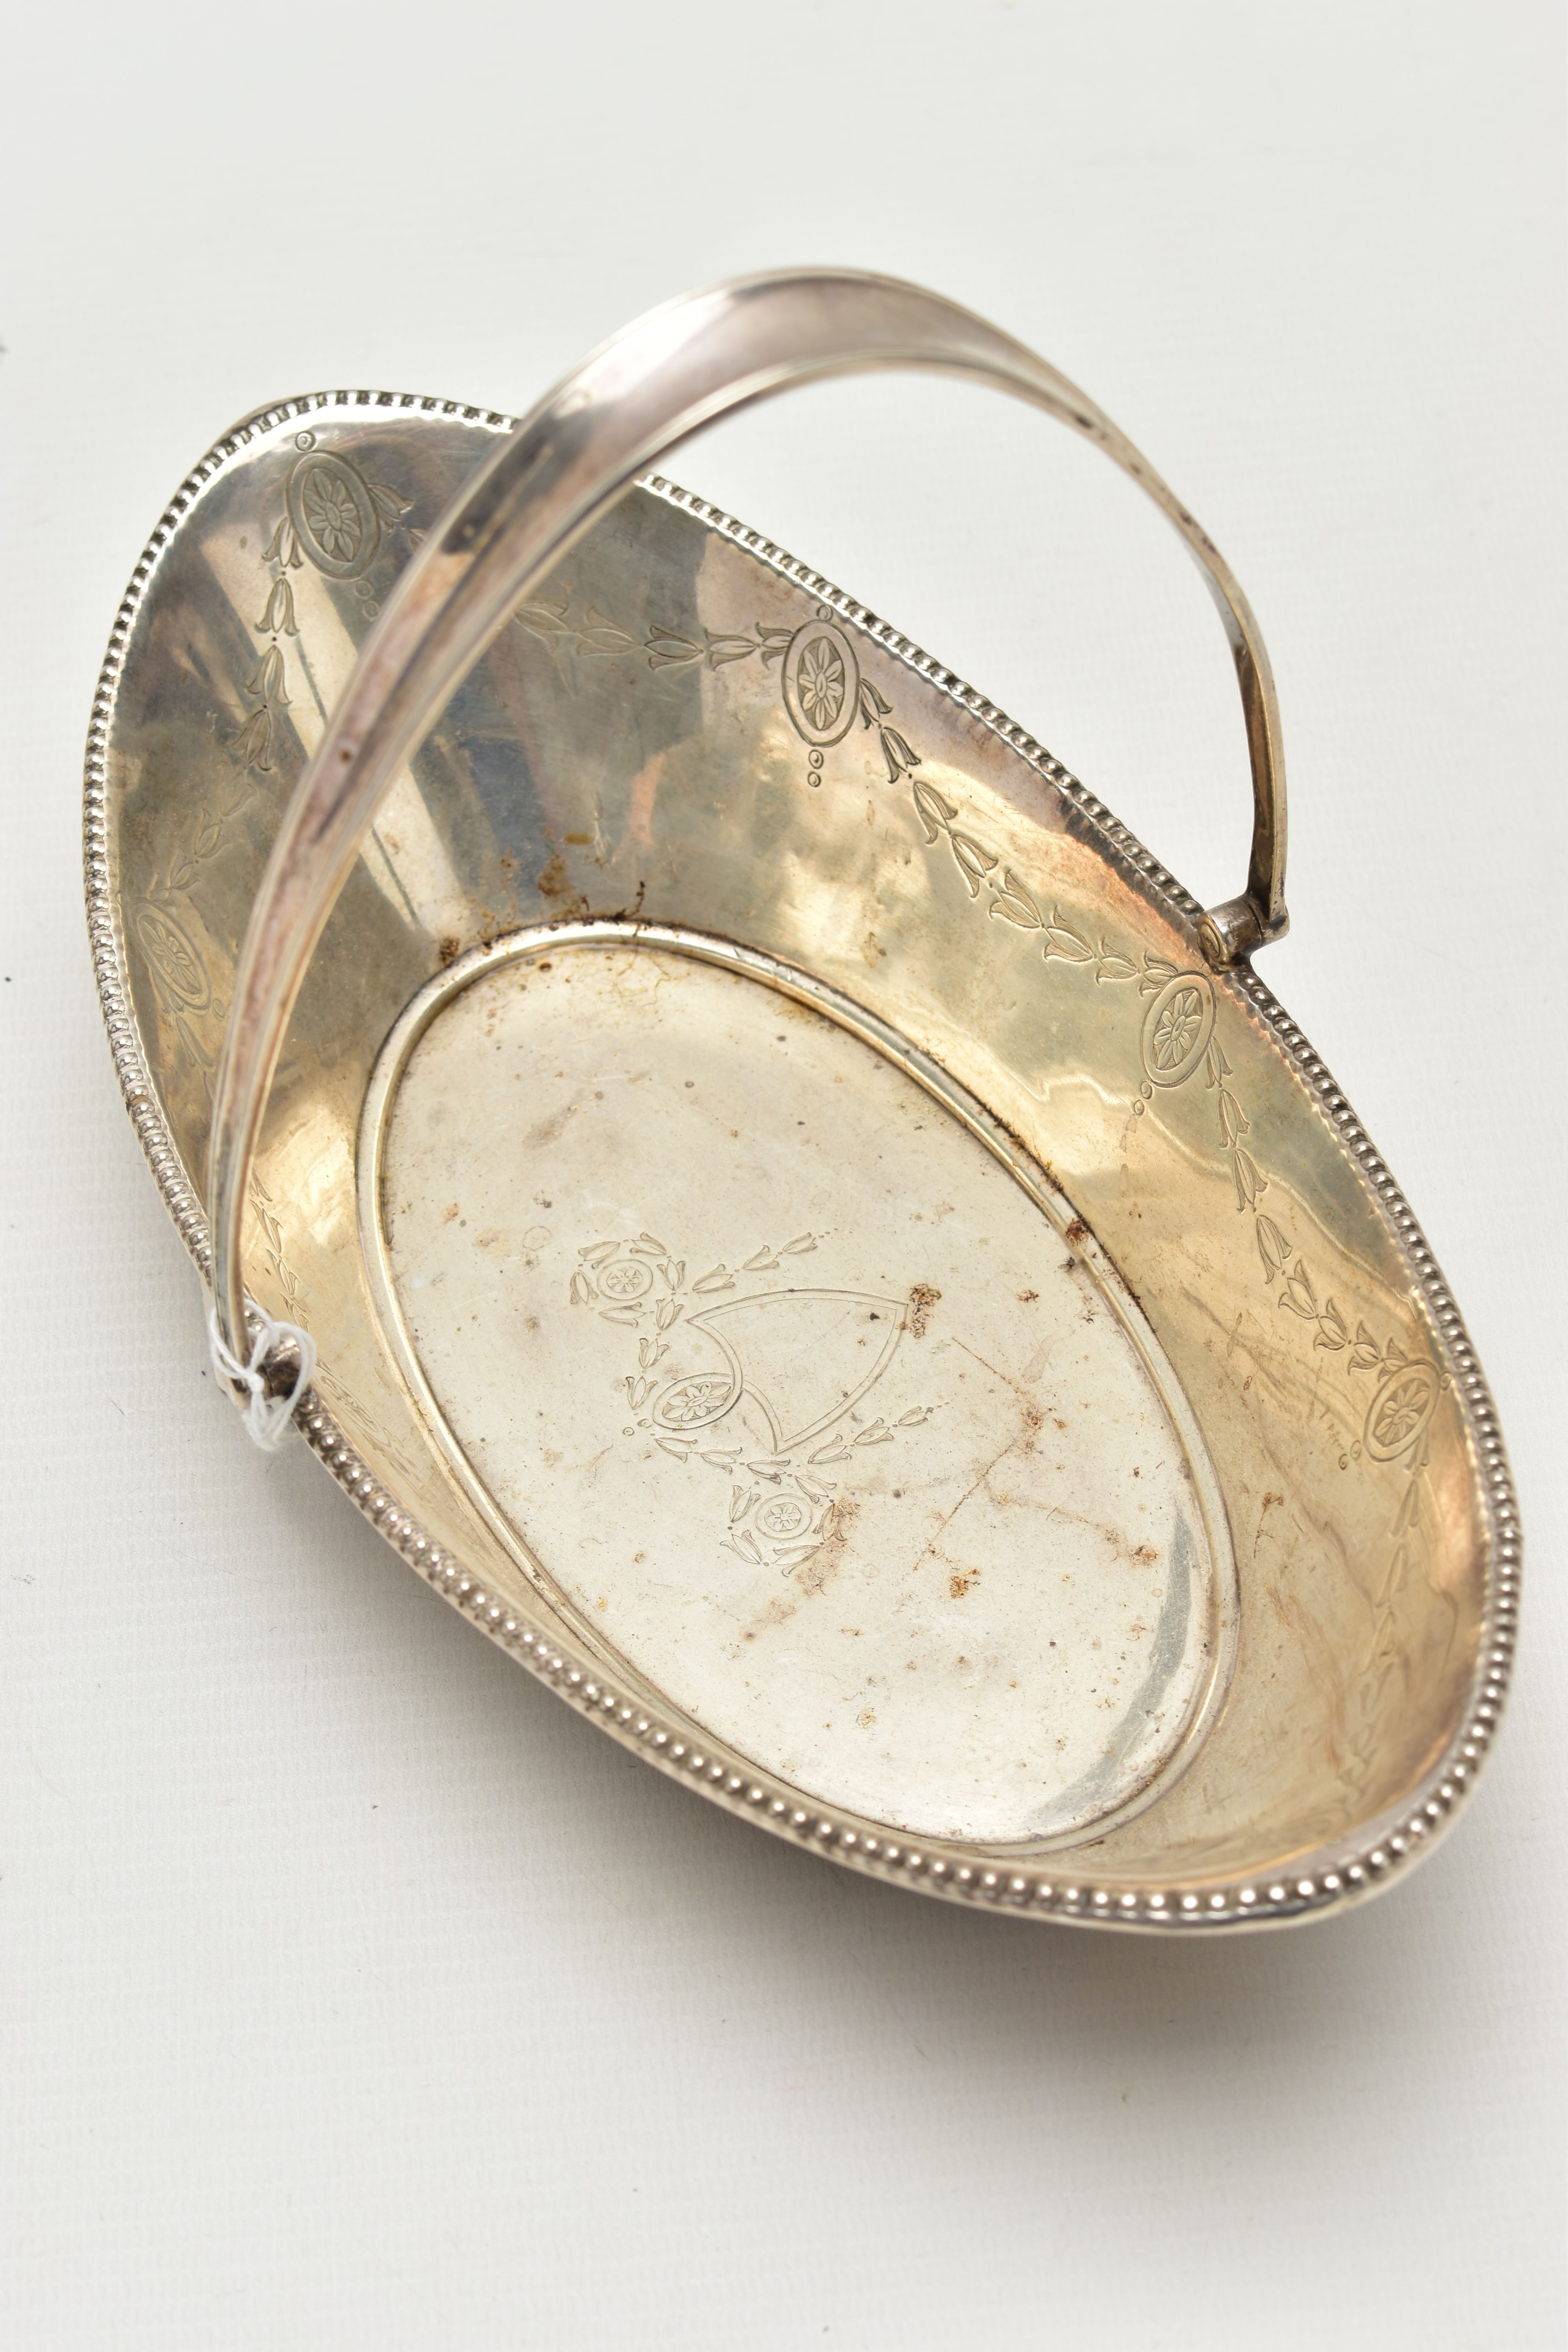 A SILVER BASKET, a boat shaped dish, engraved with floral detail, fitted with a tapered handle, - Image 7 of 8